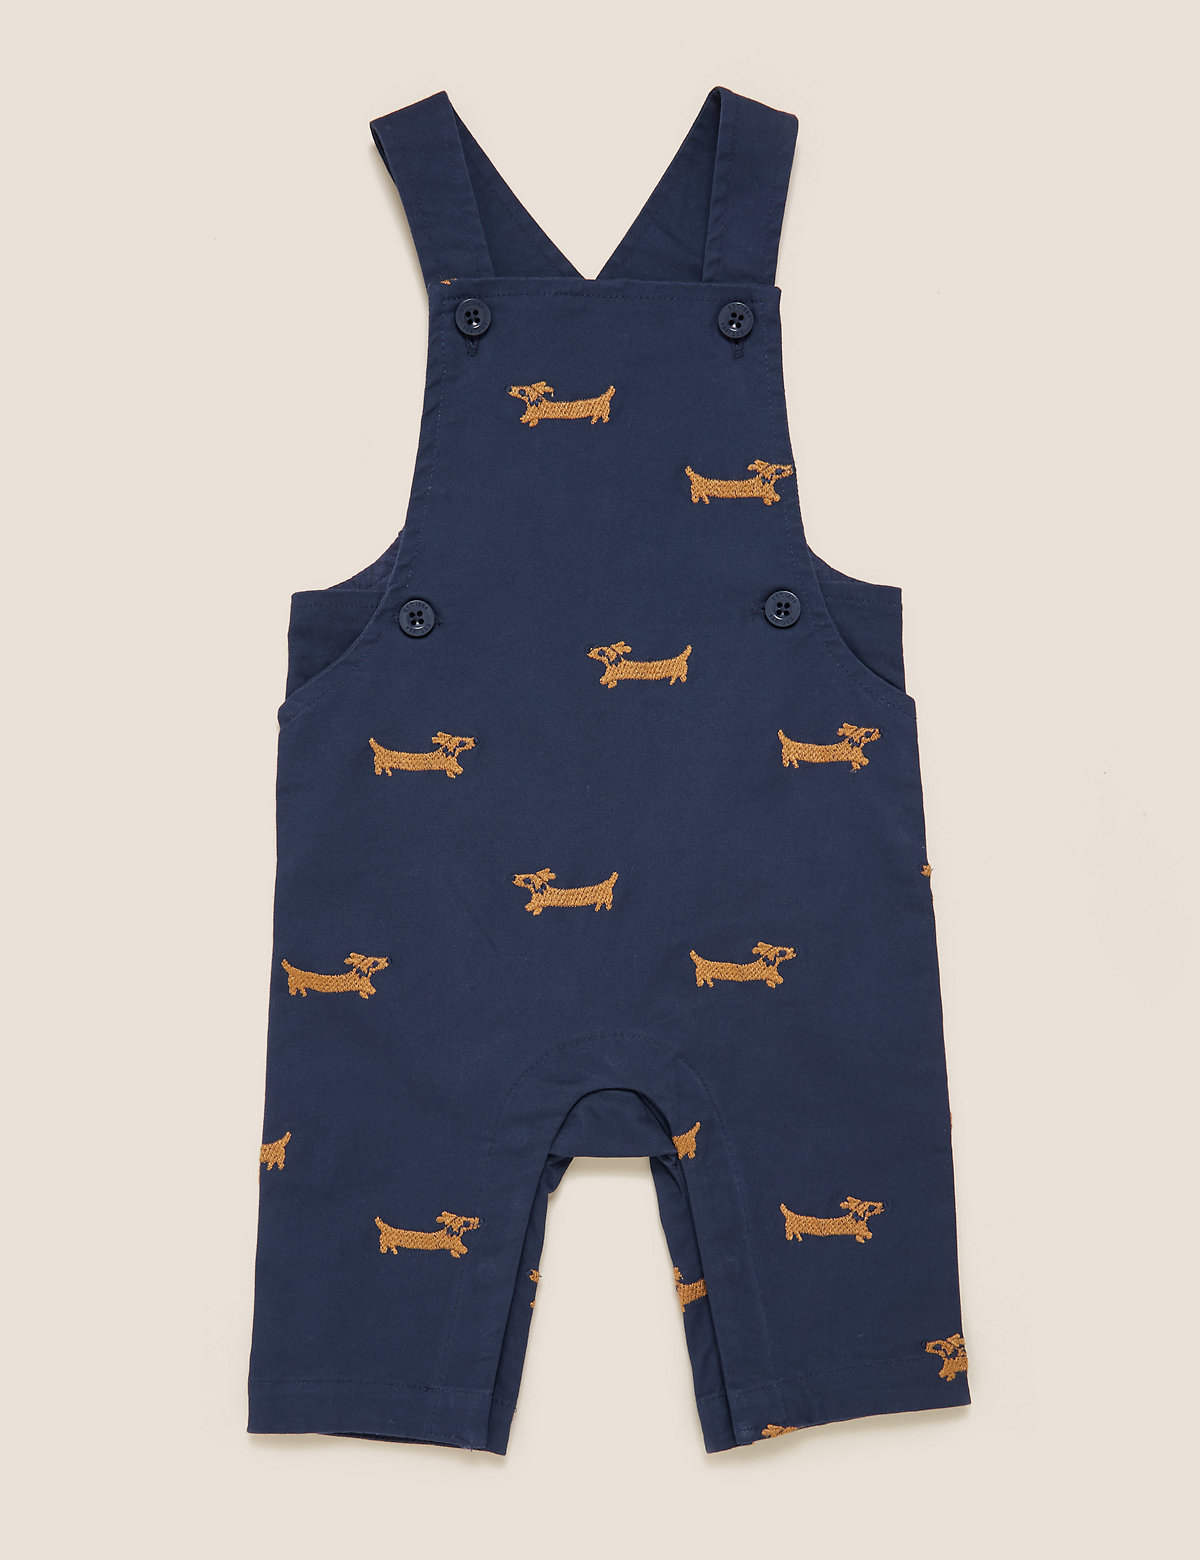 2pc Cotton Embroidered Dog Dungaree Outfit (0-3 Yrs)